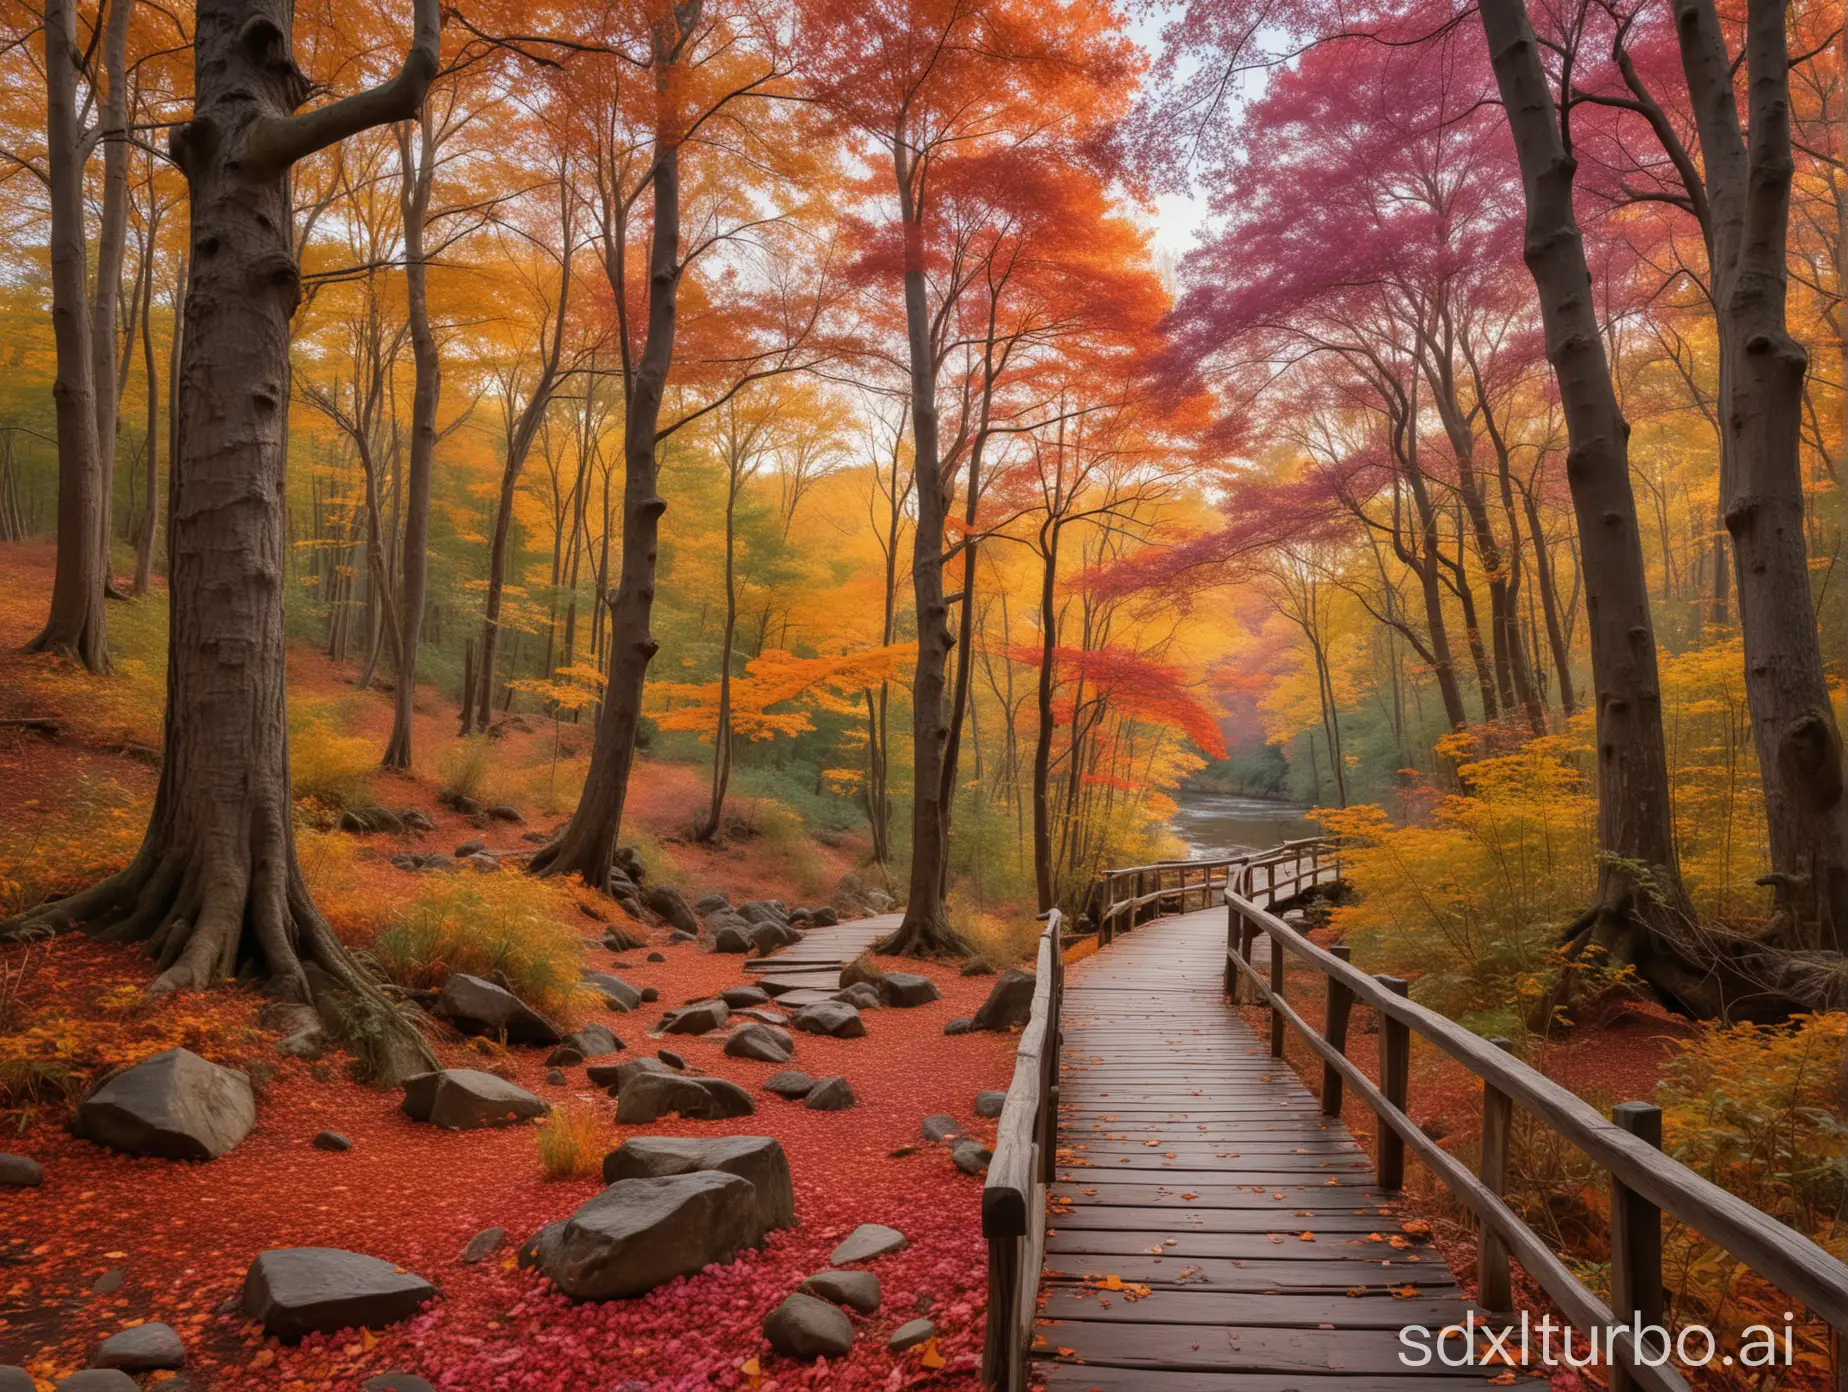 A serene autumn landscape with vibrant fall colors. In the foreground, a winding path meanders through a lush forest with towering oak and maple trees ablaze in shades of fiery red, vivid orange, and warm golden yellows. Their fallen leaves carpet the path in a stunning kaleidoscope of colors. The path leads toward a small wooden bridge arching over a babbling brook, its waters reflecting the colorful canopy above. In the distance, rolling hills dotted with more autumnal trees stretch out to meet a horizon painted in soft pinks and purples from the setting sun. Wispy clouds streak across the sky, casting gentle shadows over the idyllic scene. The crisp autumn air is alive with the earthy scents of decaying leaves and pine needles.